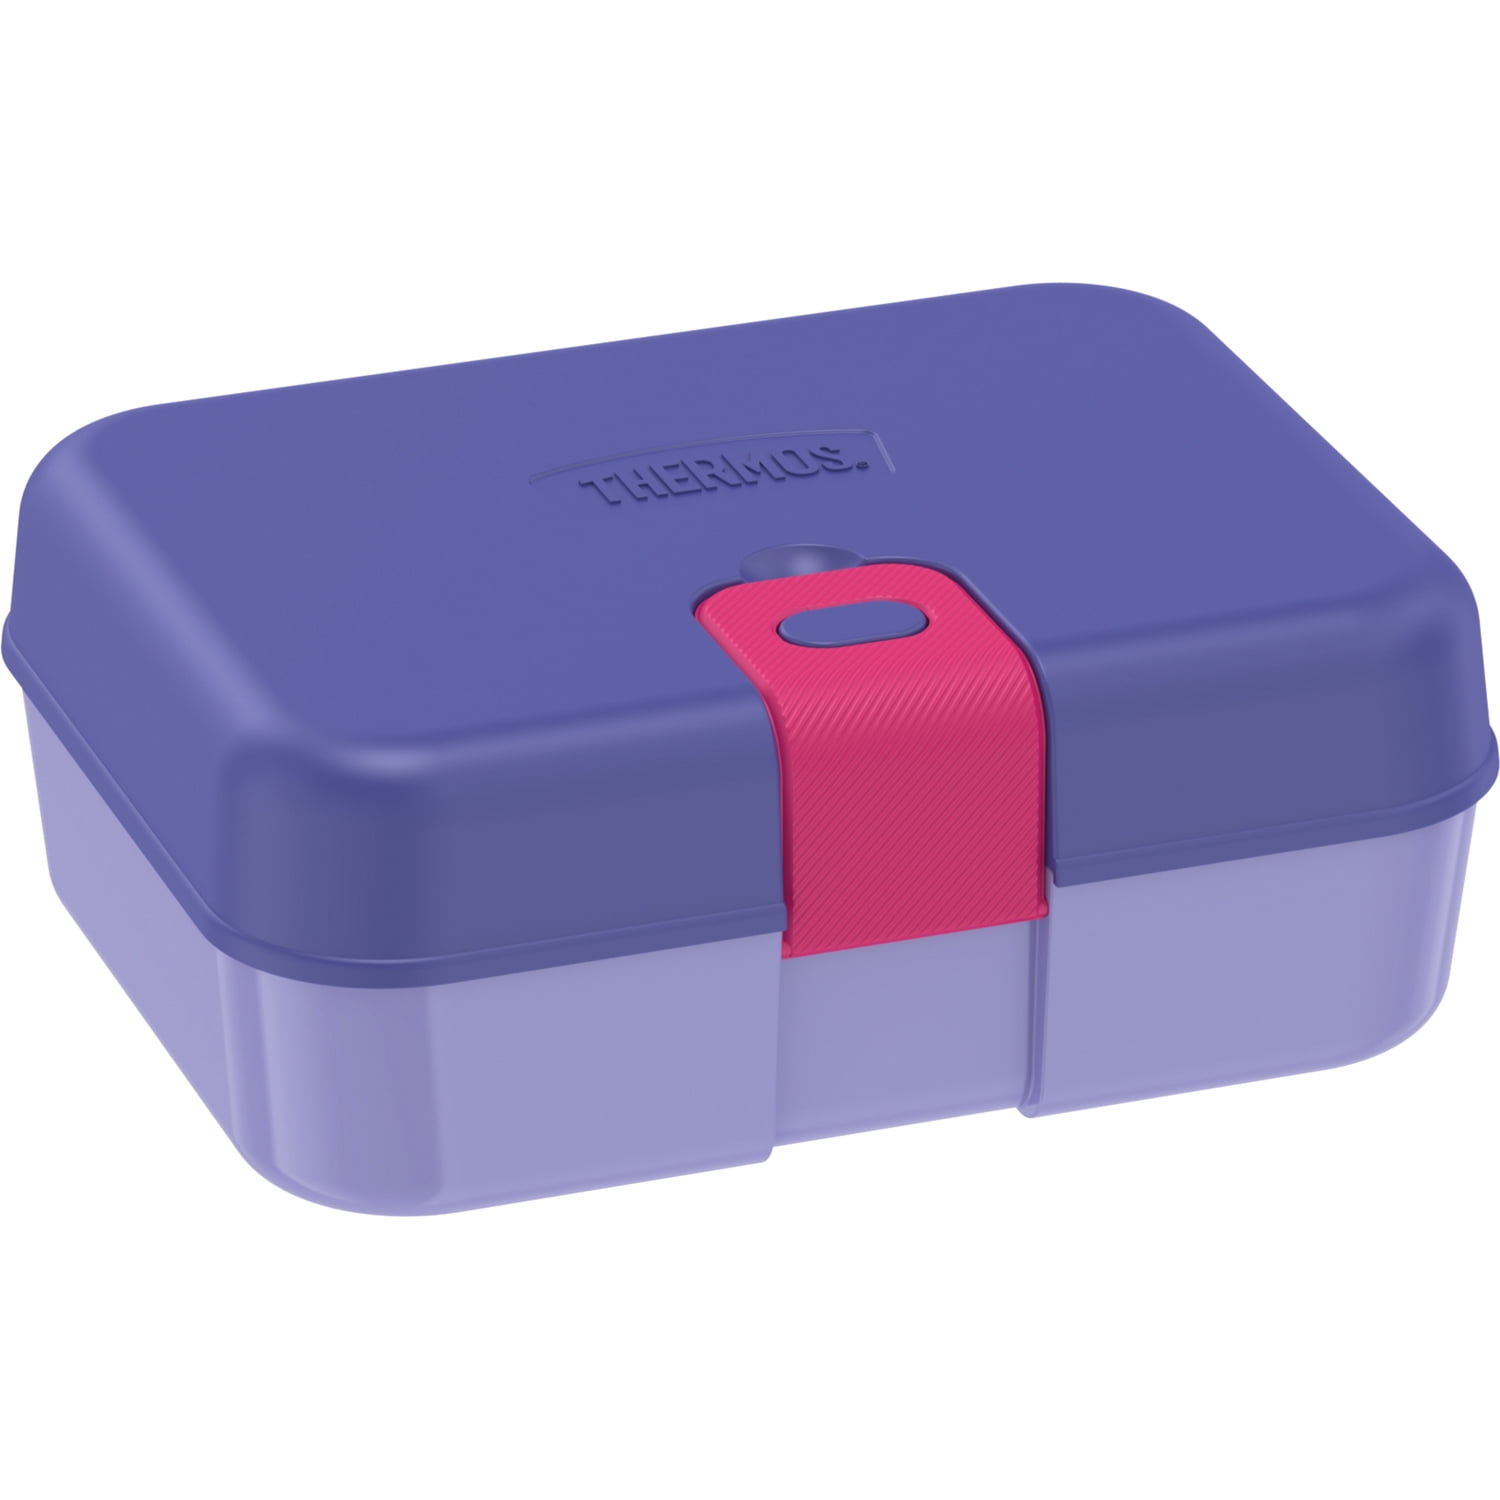 Thermos Dual Compartment Lunch Kit, My Little Pony, Purple-Pink – ShopBobbys